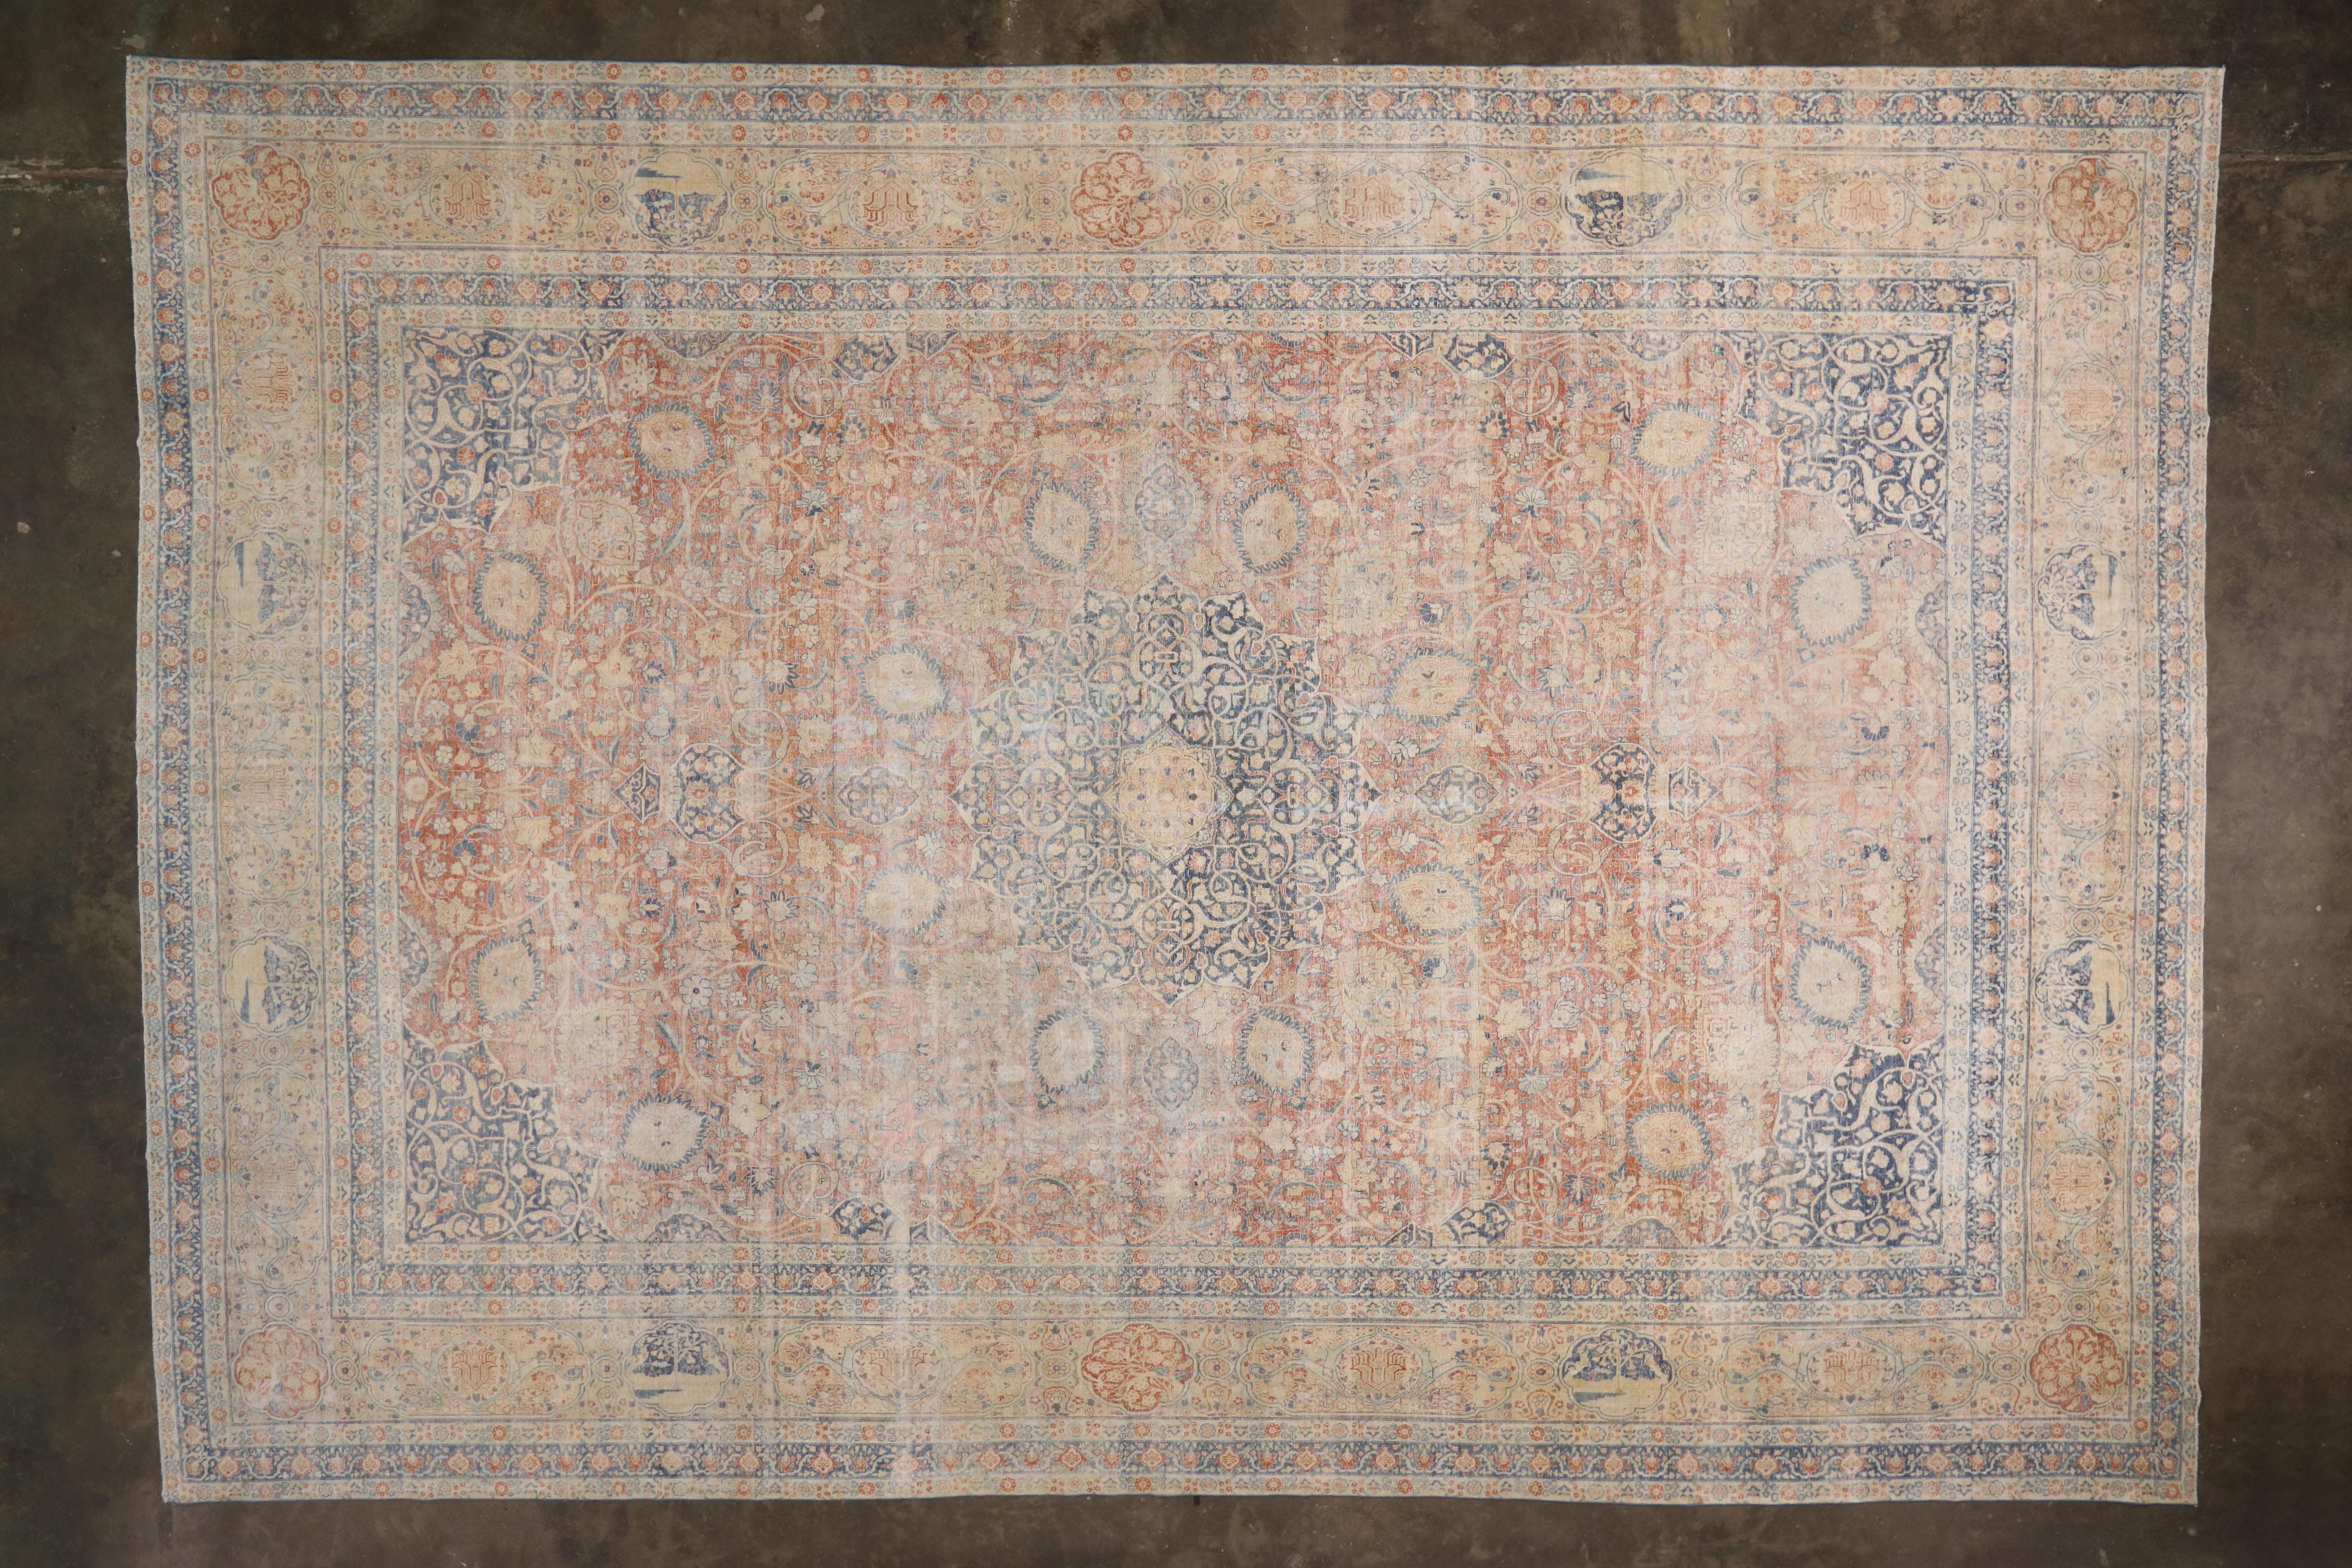 Distressed Antique Persian Tabriz Palace Rug with Rustic Relaxed Federal Style 2